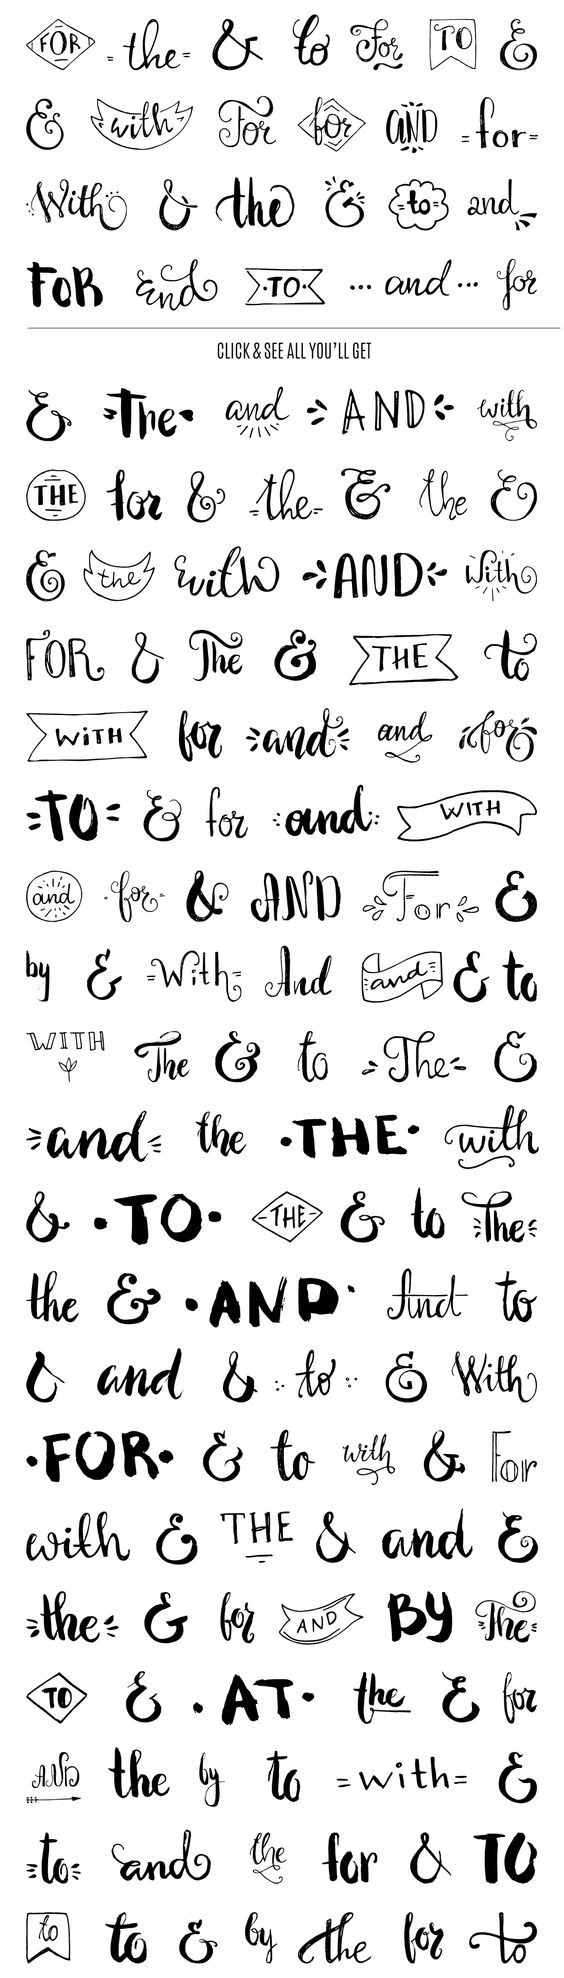 Handdrawn Catchwords Set (PNG, EPS): Handdrawn Catchwords Set include over 130 elements - mainly different catchwords and some ampersands. All elements were hand-sketched with ink pens and calligraphy brushes. I wanted to preserve texture in order for elements to look more natural, so they are pretty rough & sometimes messy, but they look great when used in all sorts of design.